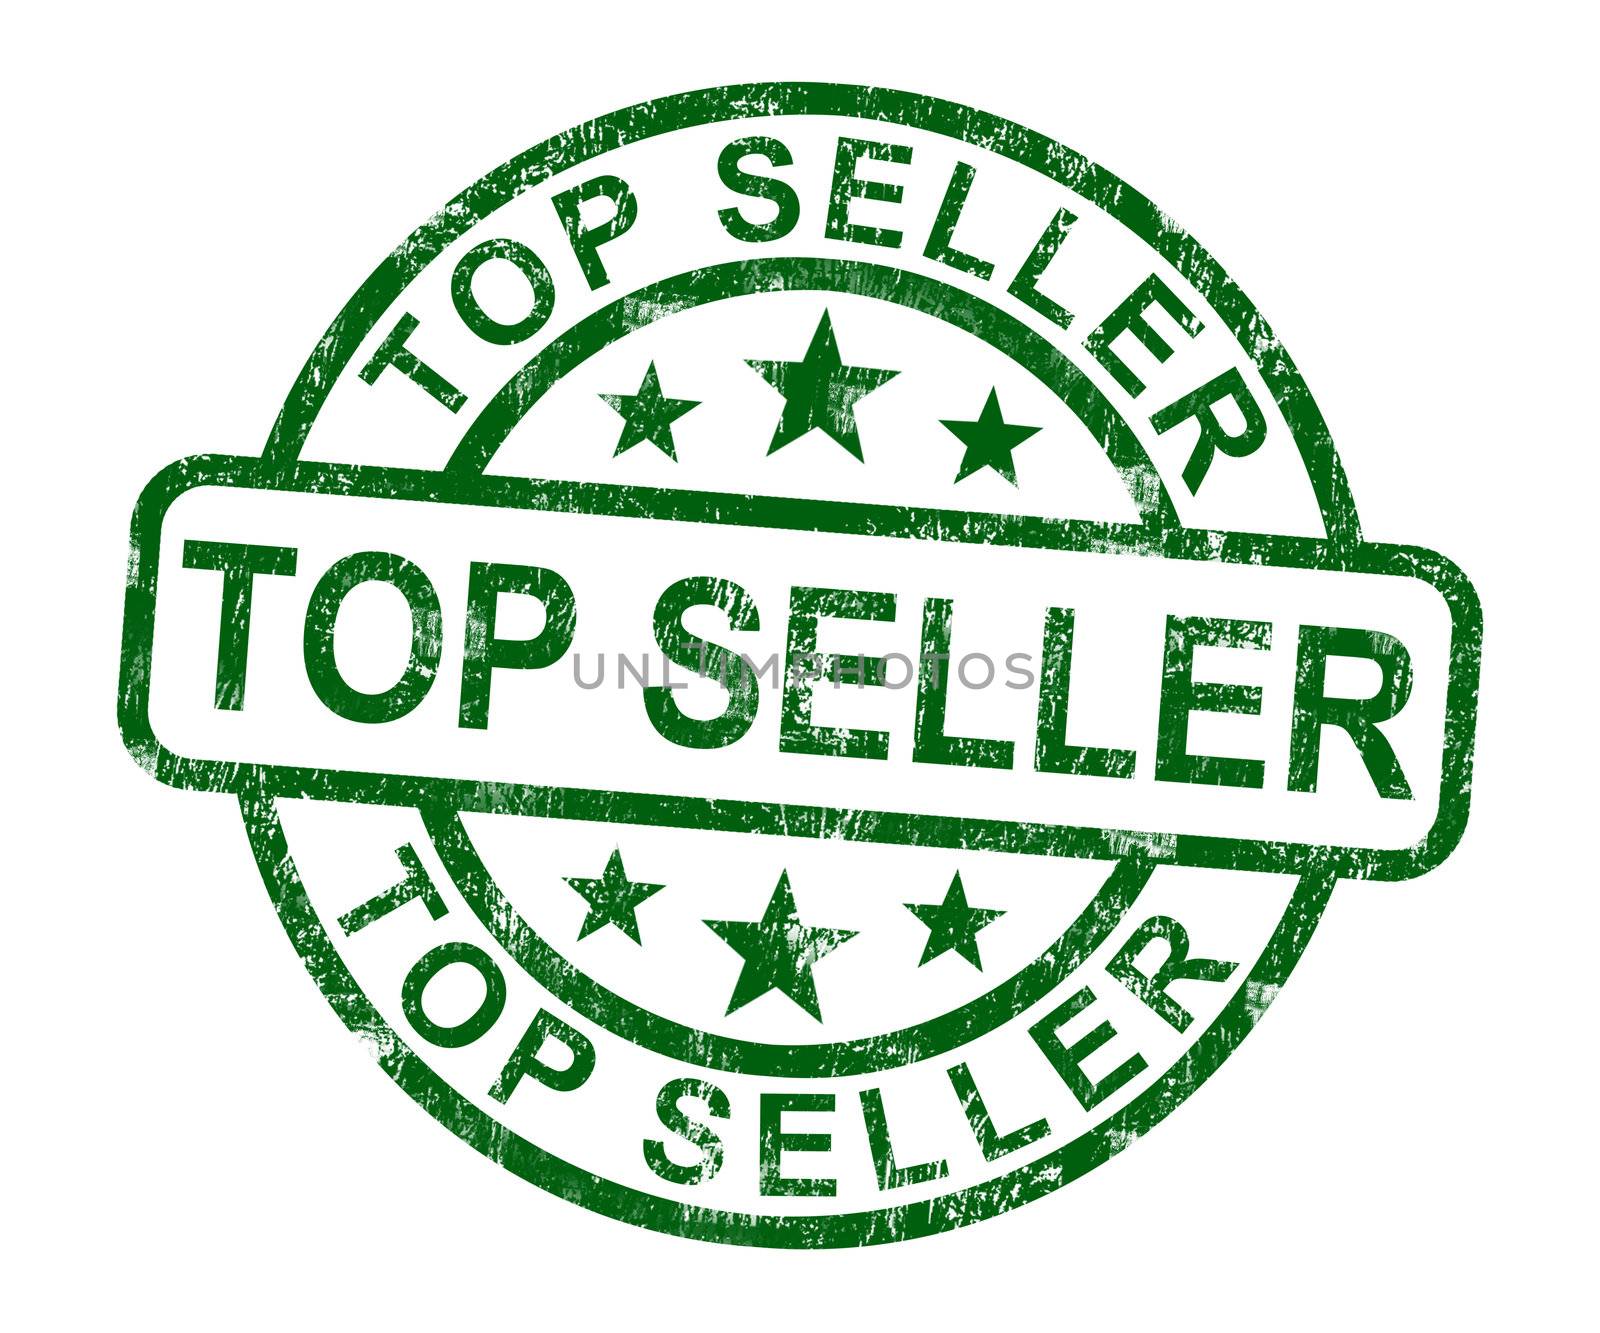 Top Seller Stamp Shows Best Services Or Products by stuartmiles